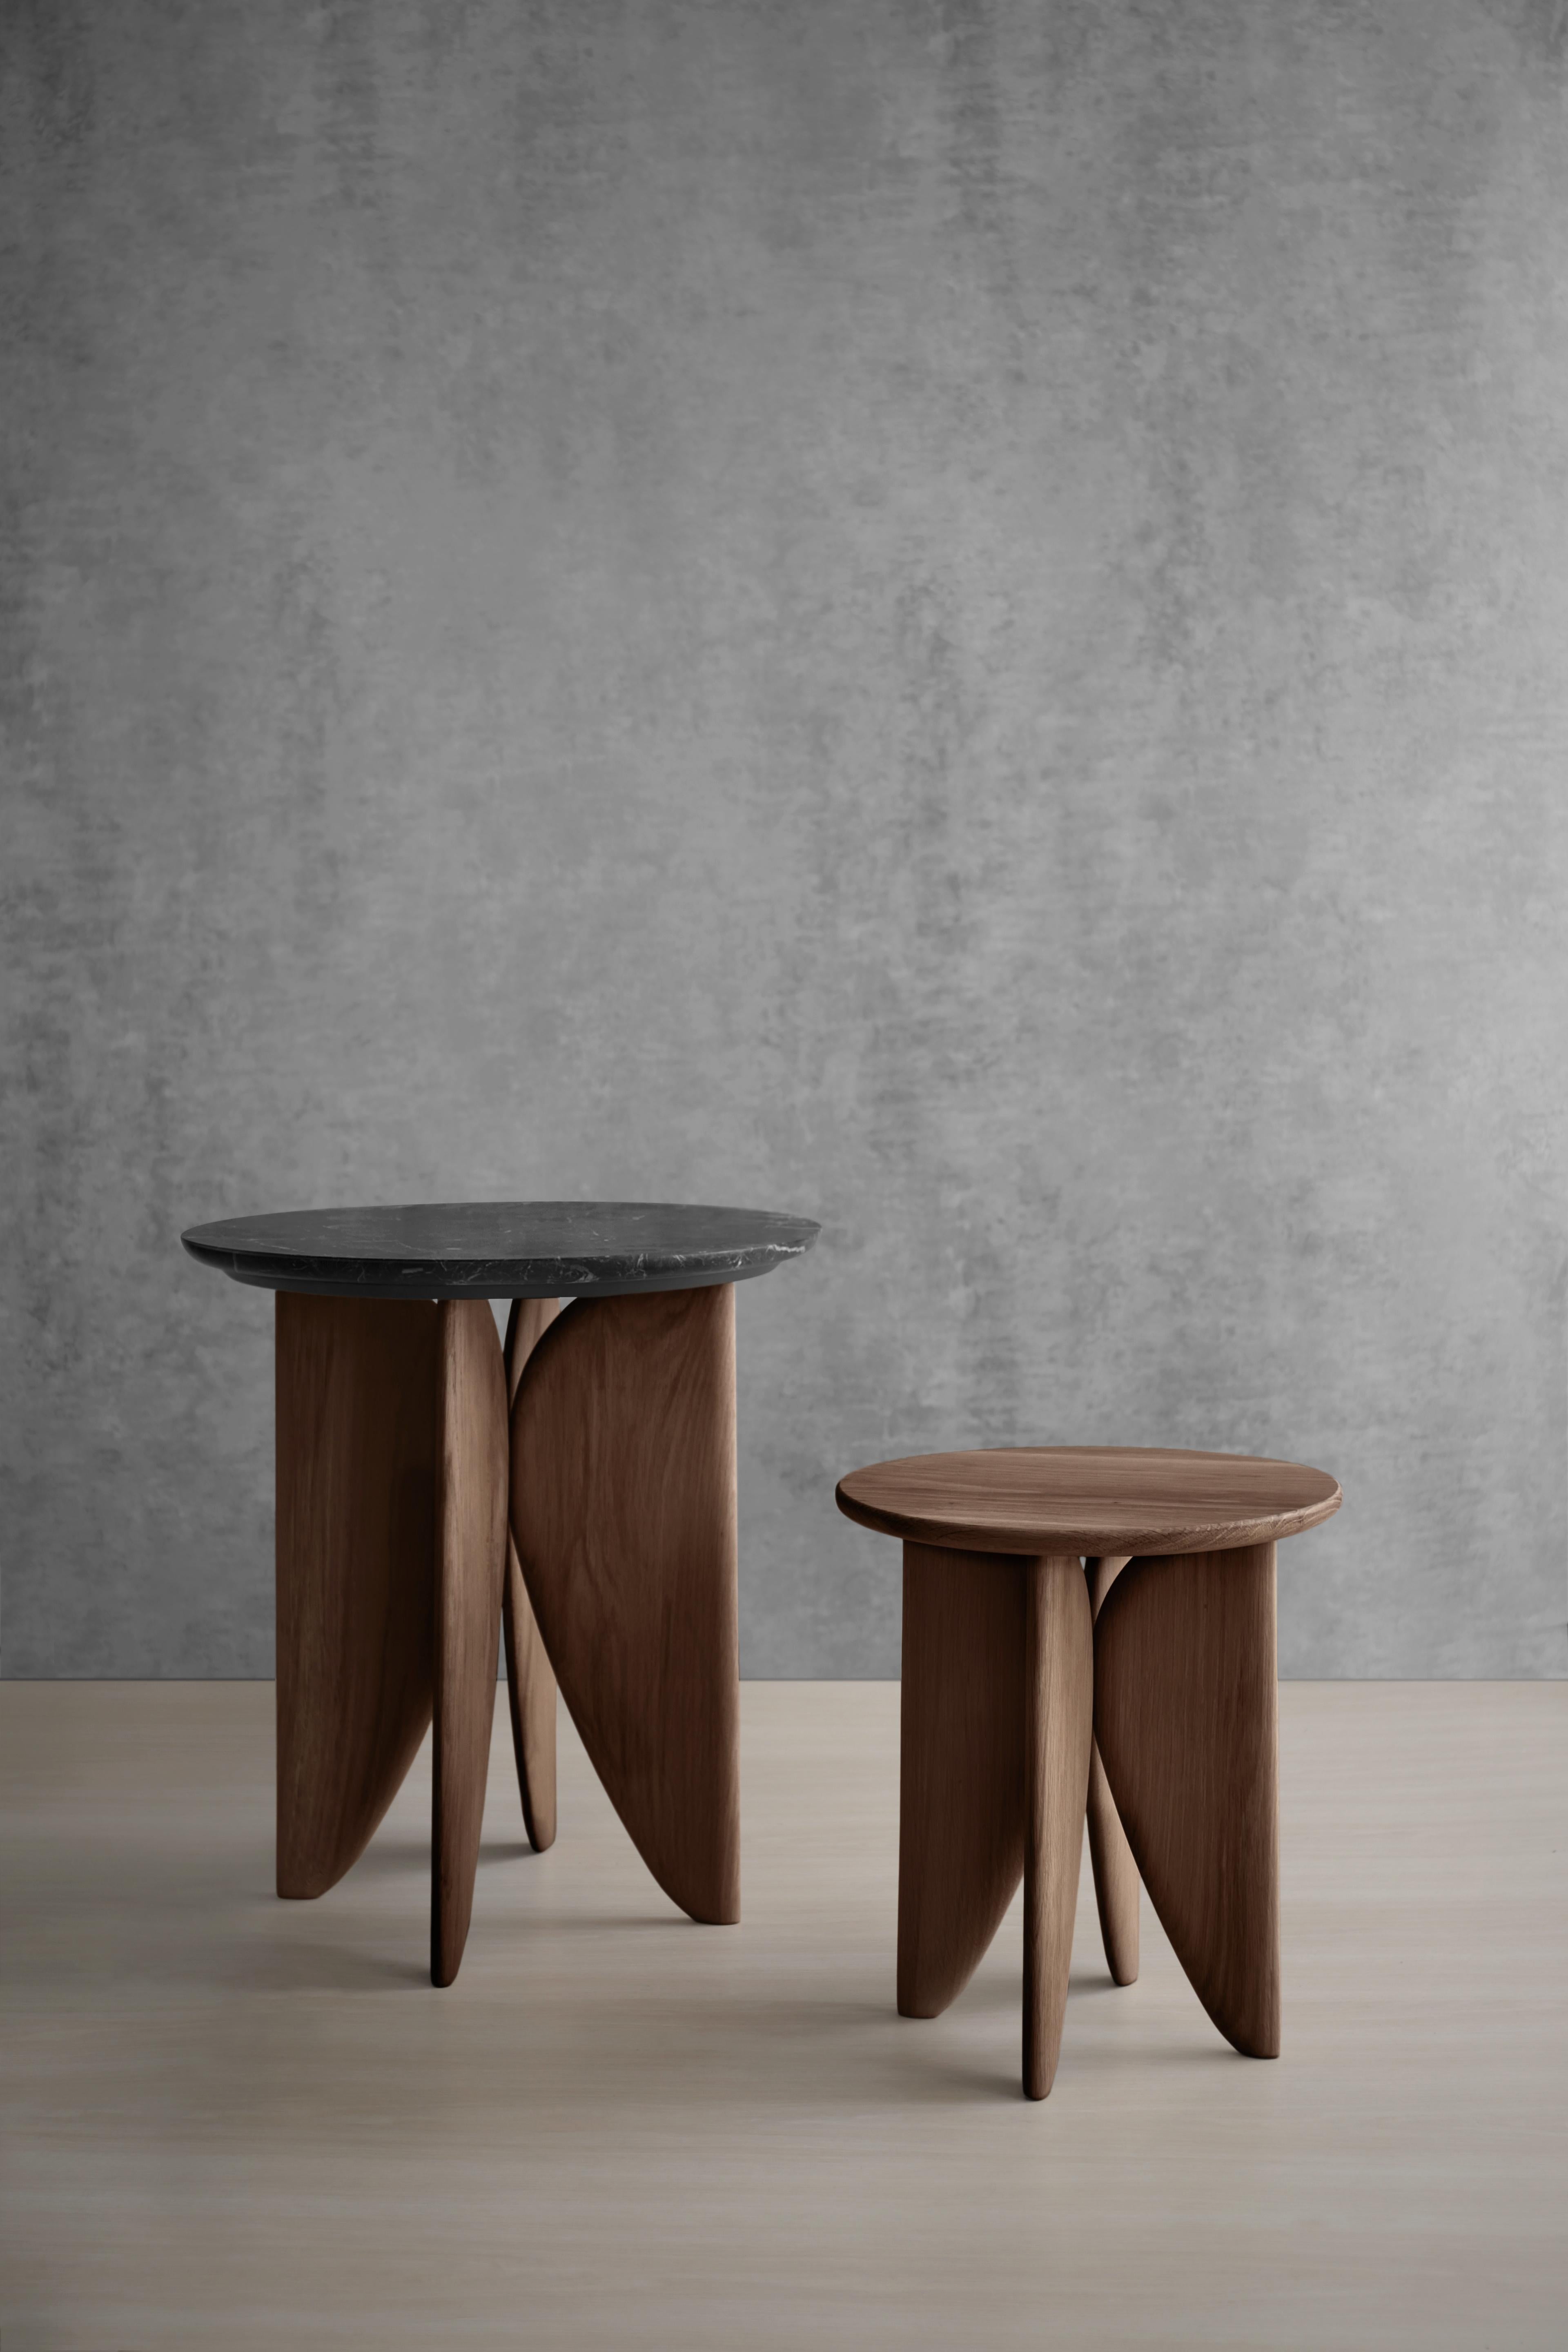 Burnished Noviembre v Stool, Side Table Inspired in Brancusi in Walnut by Joel Escalona For Sale